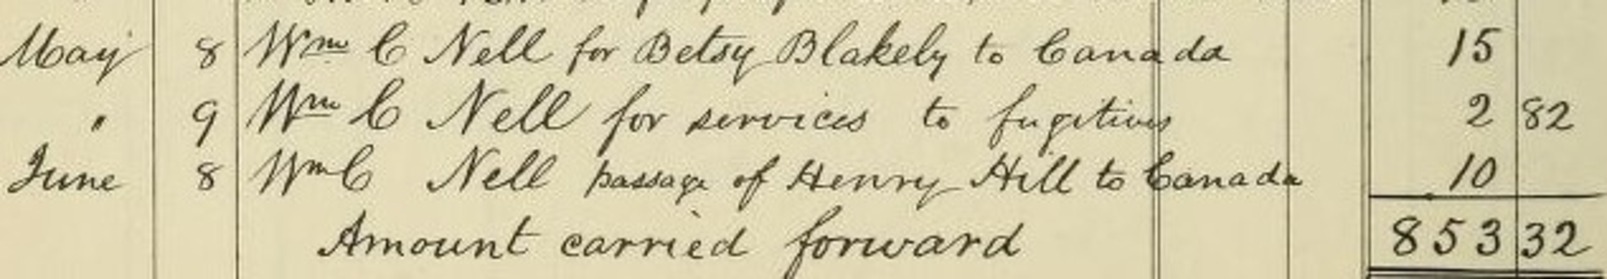 Record book that lists William C. Nell assisting Betsy Blakeley